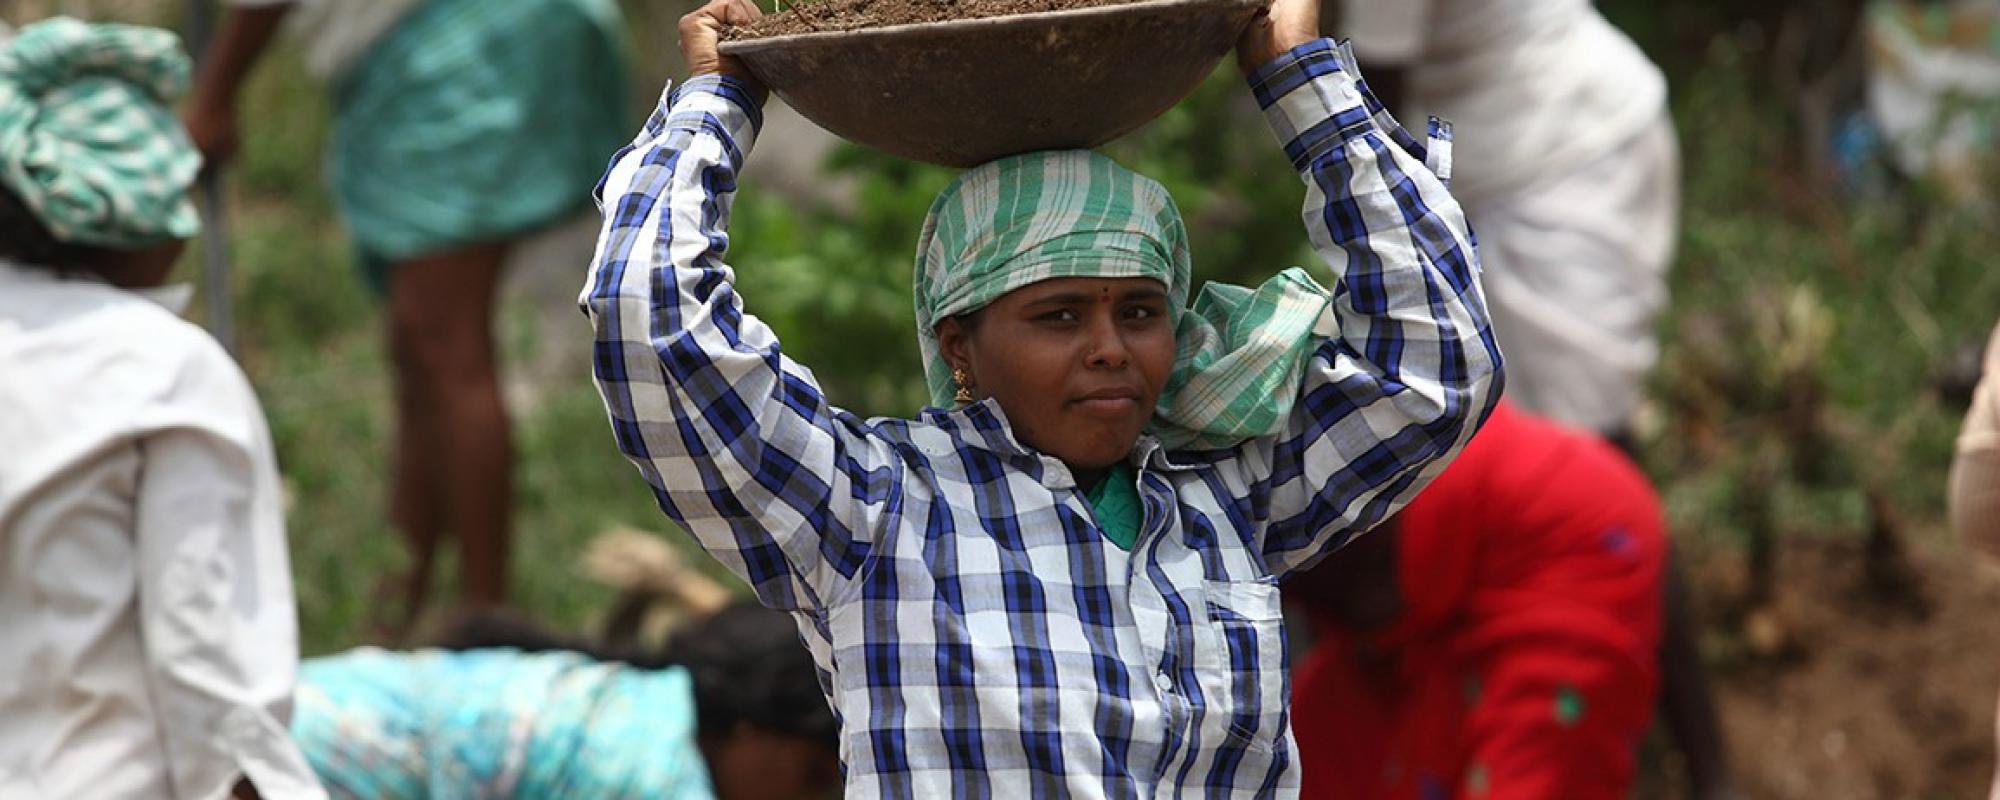 women carrying a bowl on her head 